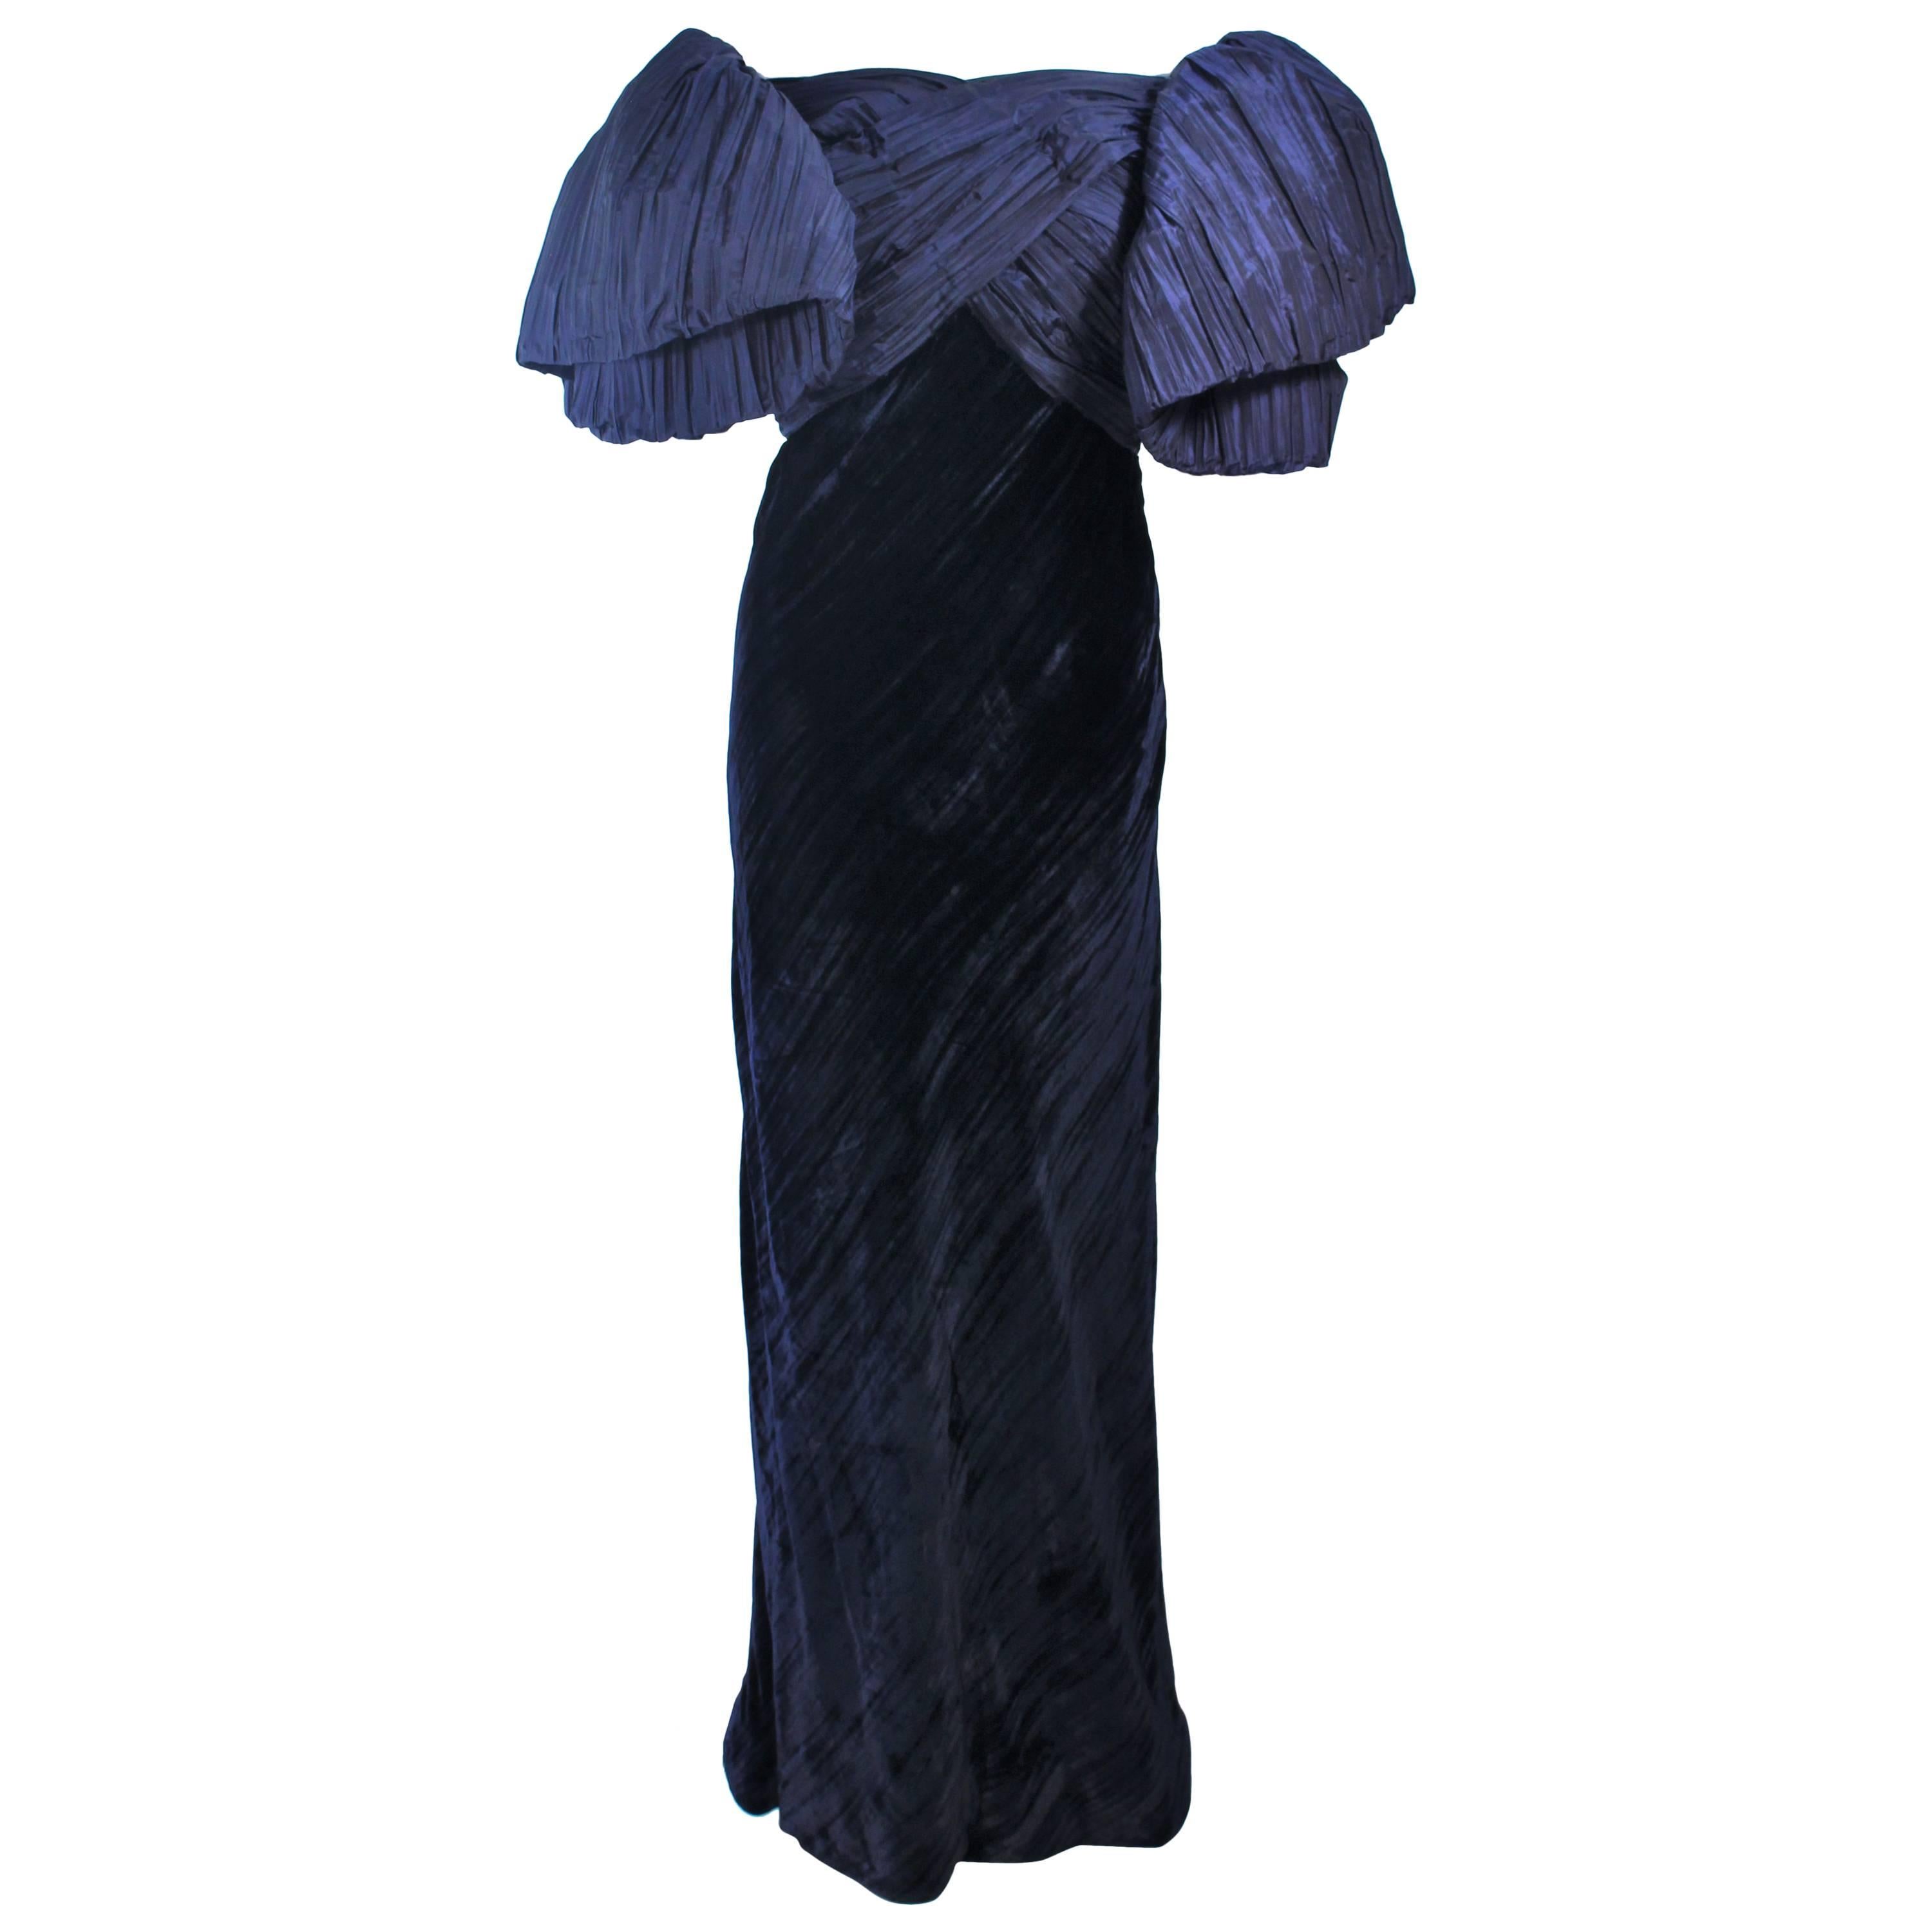 JACQUELINE DE RIBES Gown Navy Bias Velvet and Pleated Bodice Size 6 8